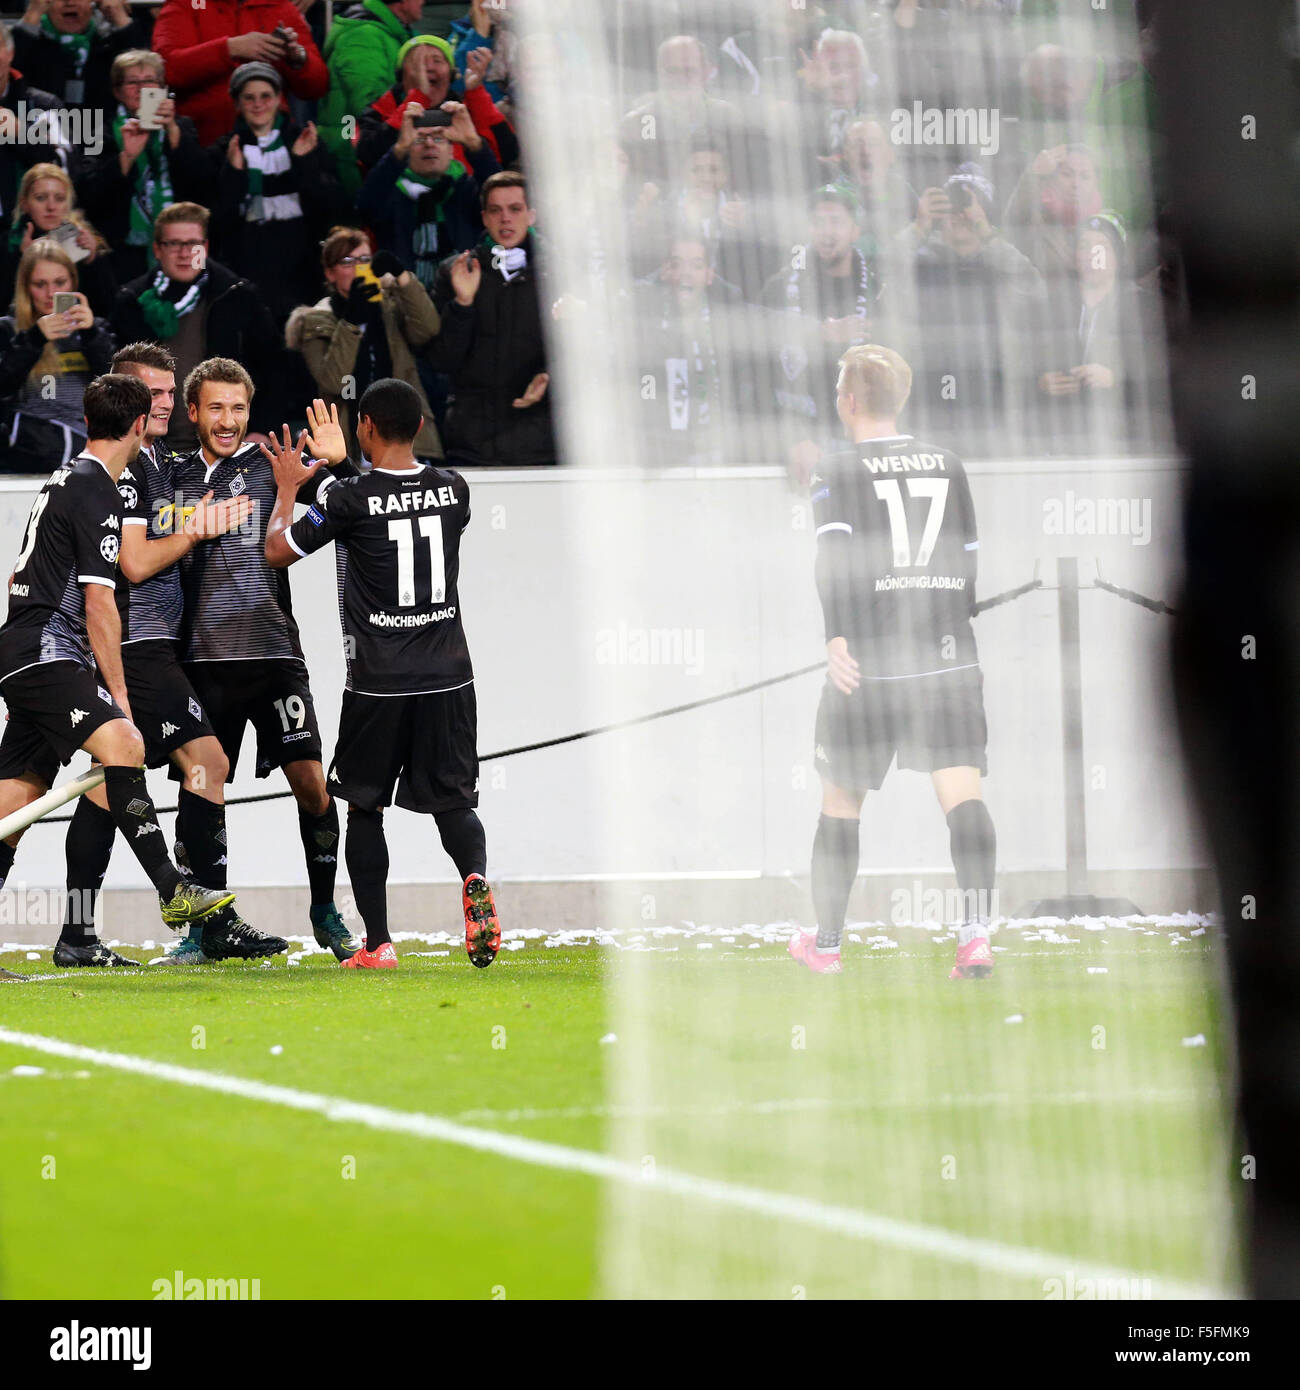 Moenchengladbach, Germany. 3rd Nov, 2015. Fabian Johnson (3rd L) of Moenchengladbach celebrates scoring during the UEFA Champions League Group D match against Juventus in Moenchengladbach, Germany, on November 3, 2015. The match ended with 1-1. © Luo Huanhuan/Xinhua/Alamy Live News Stock Photo